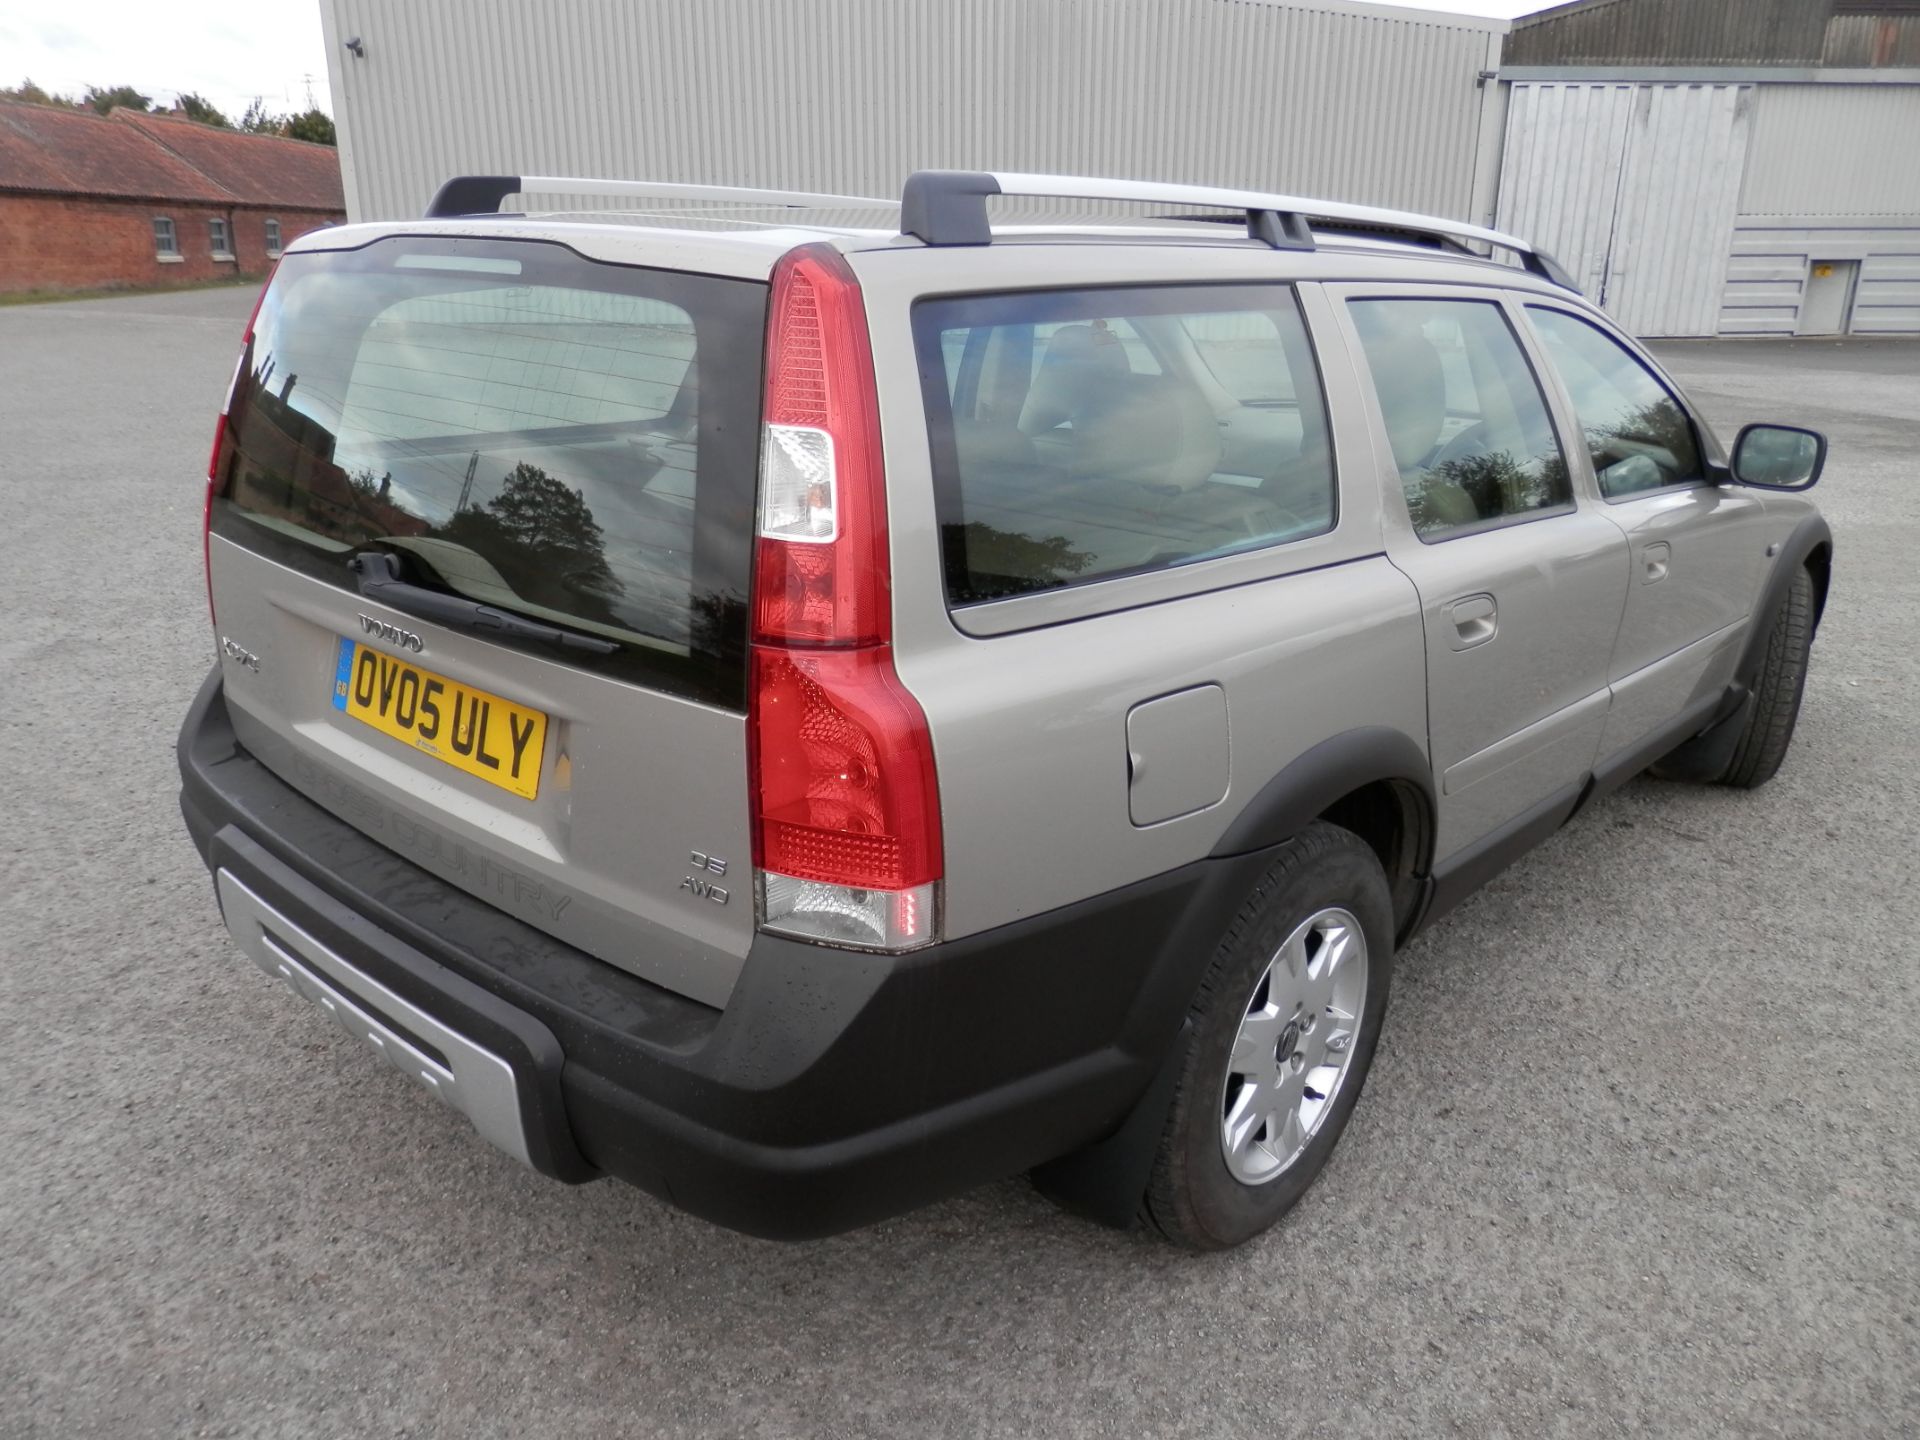 2005/05 VOLVO XC70 CROSS COUNTRY 2.4 D5 DIESEL AUTOMATIC, 4 WHEEL DRIVE, MOT MAY 2017, 150K MILES. - Image 4 of 26